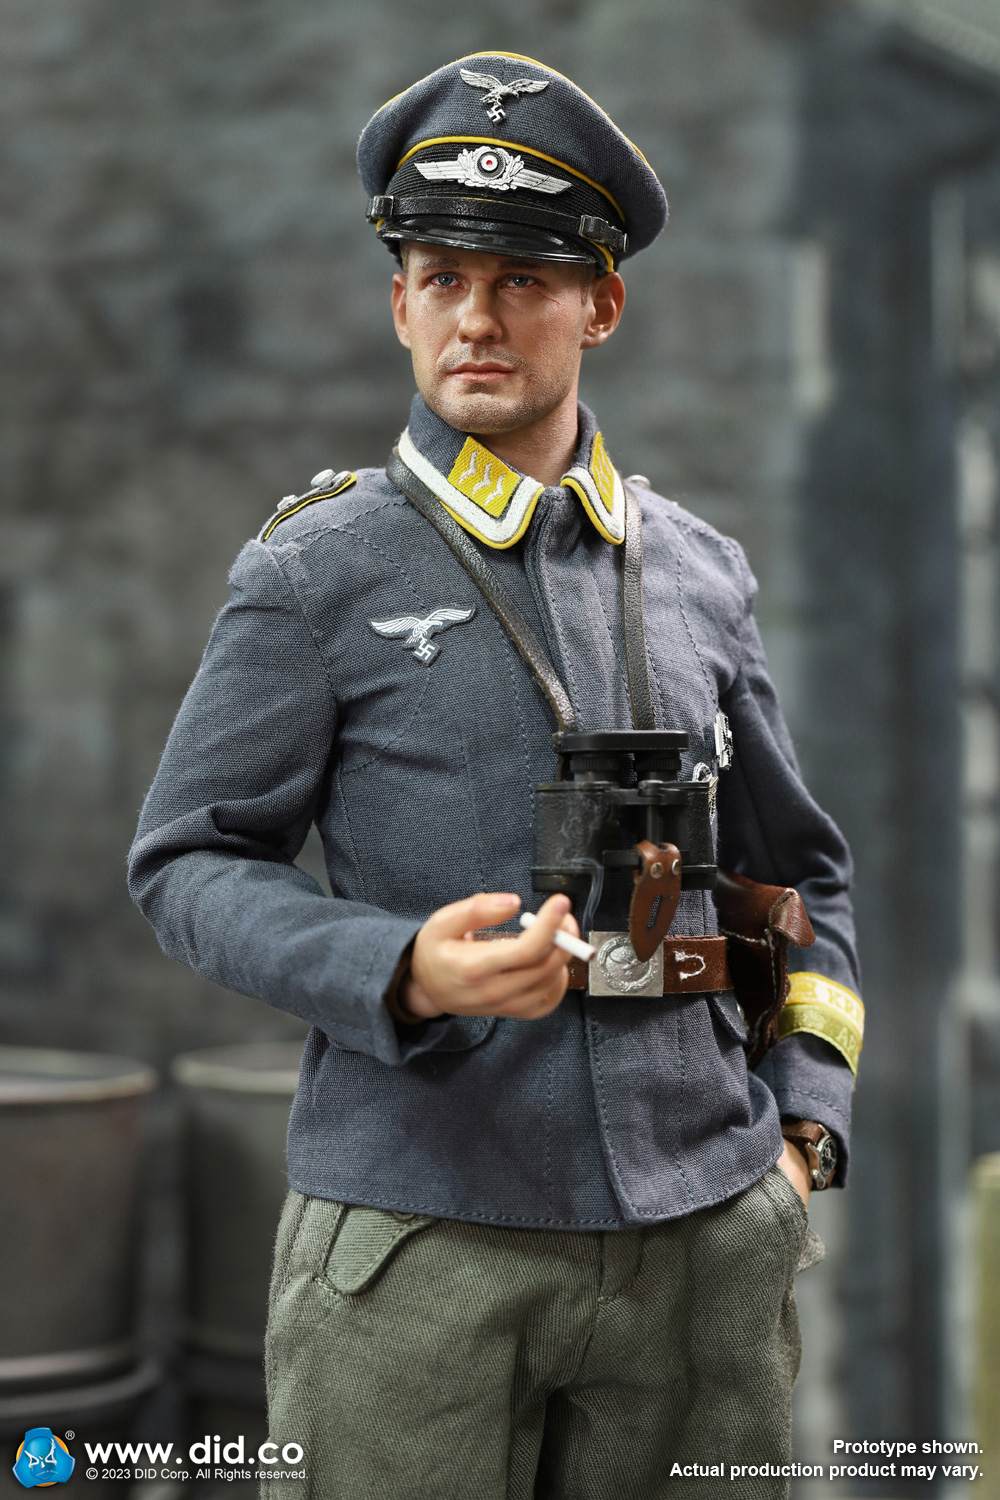 Axel - NEW PRODUCT: DiD: D80168 DID 20th Anniversary Edition WWII German Fallschirmjager  Axel  677